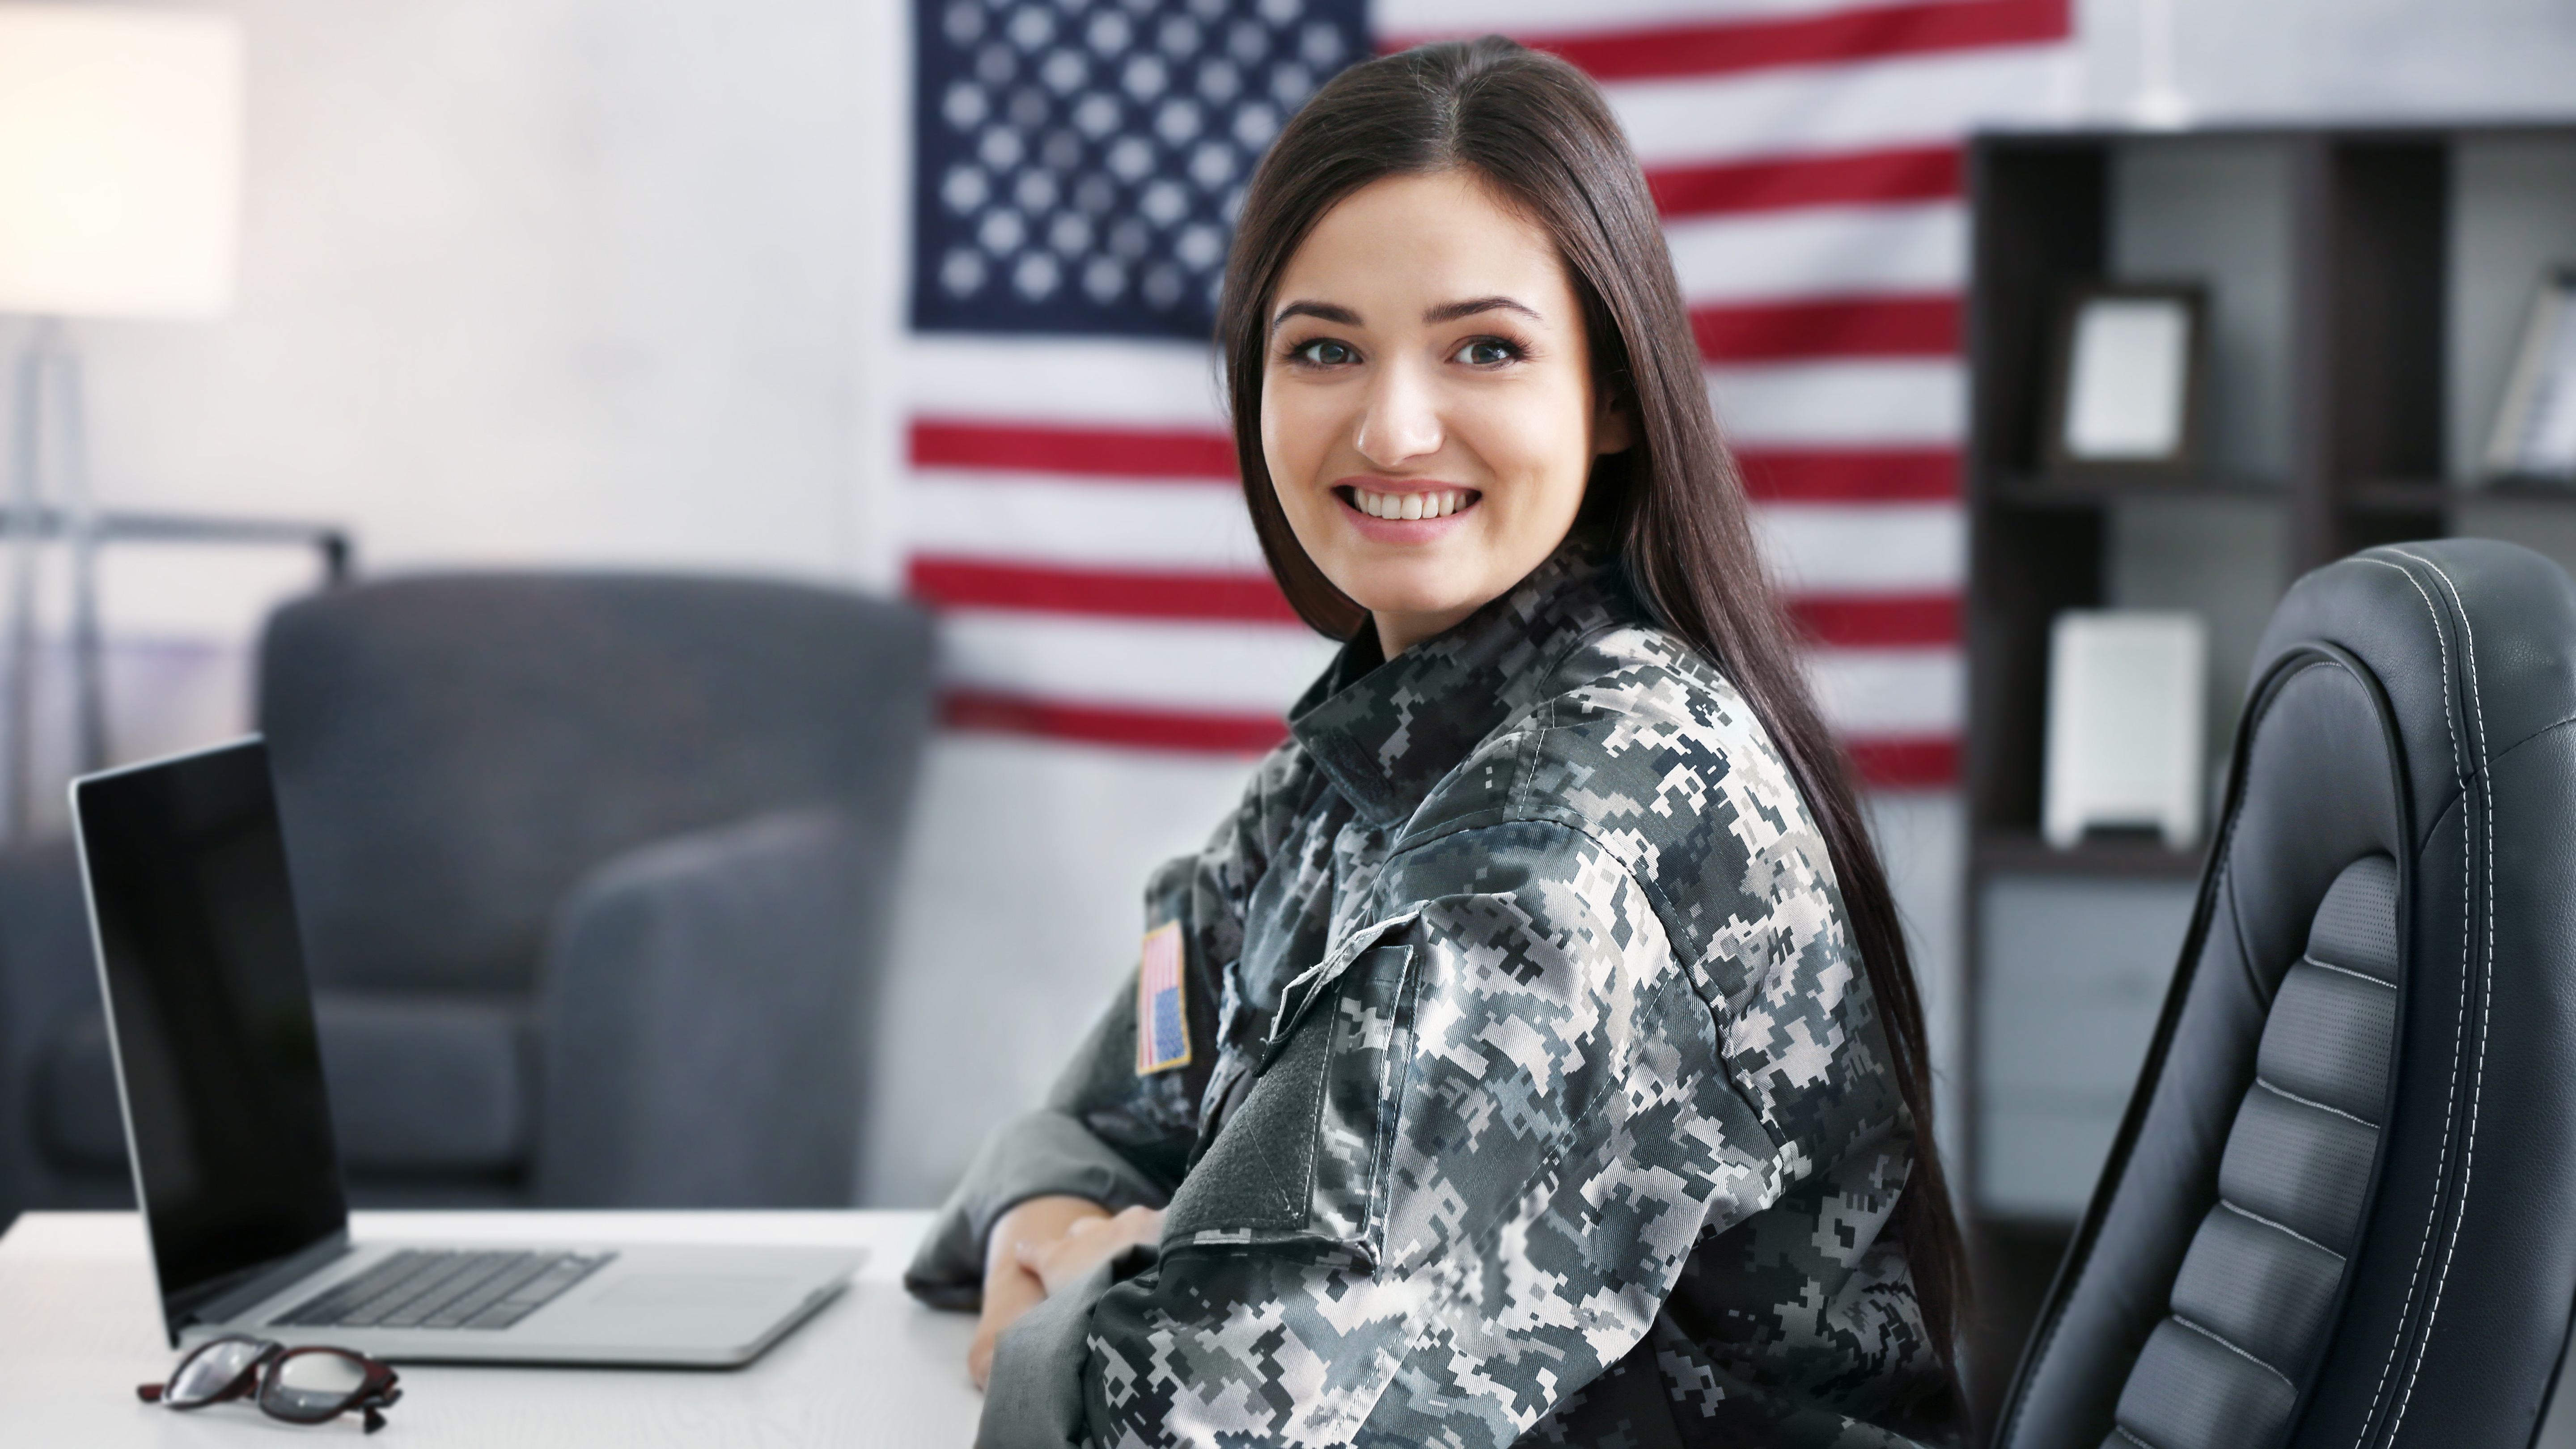 Female Veterans: What to Wear to Rock Your Interview